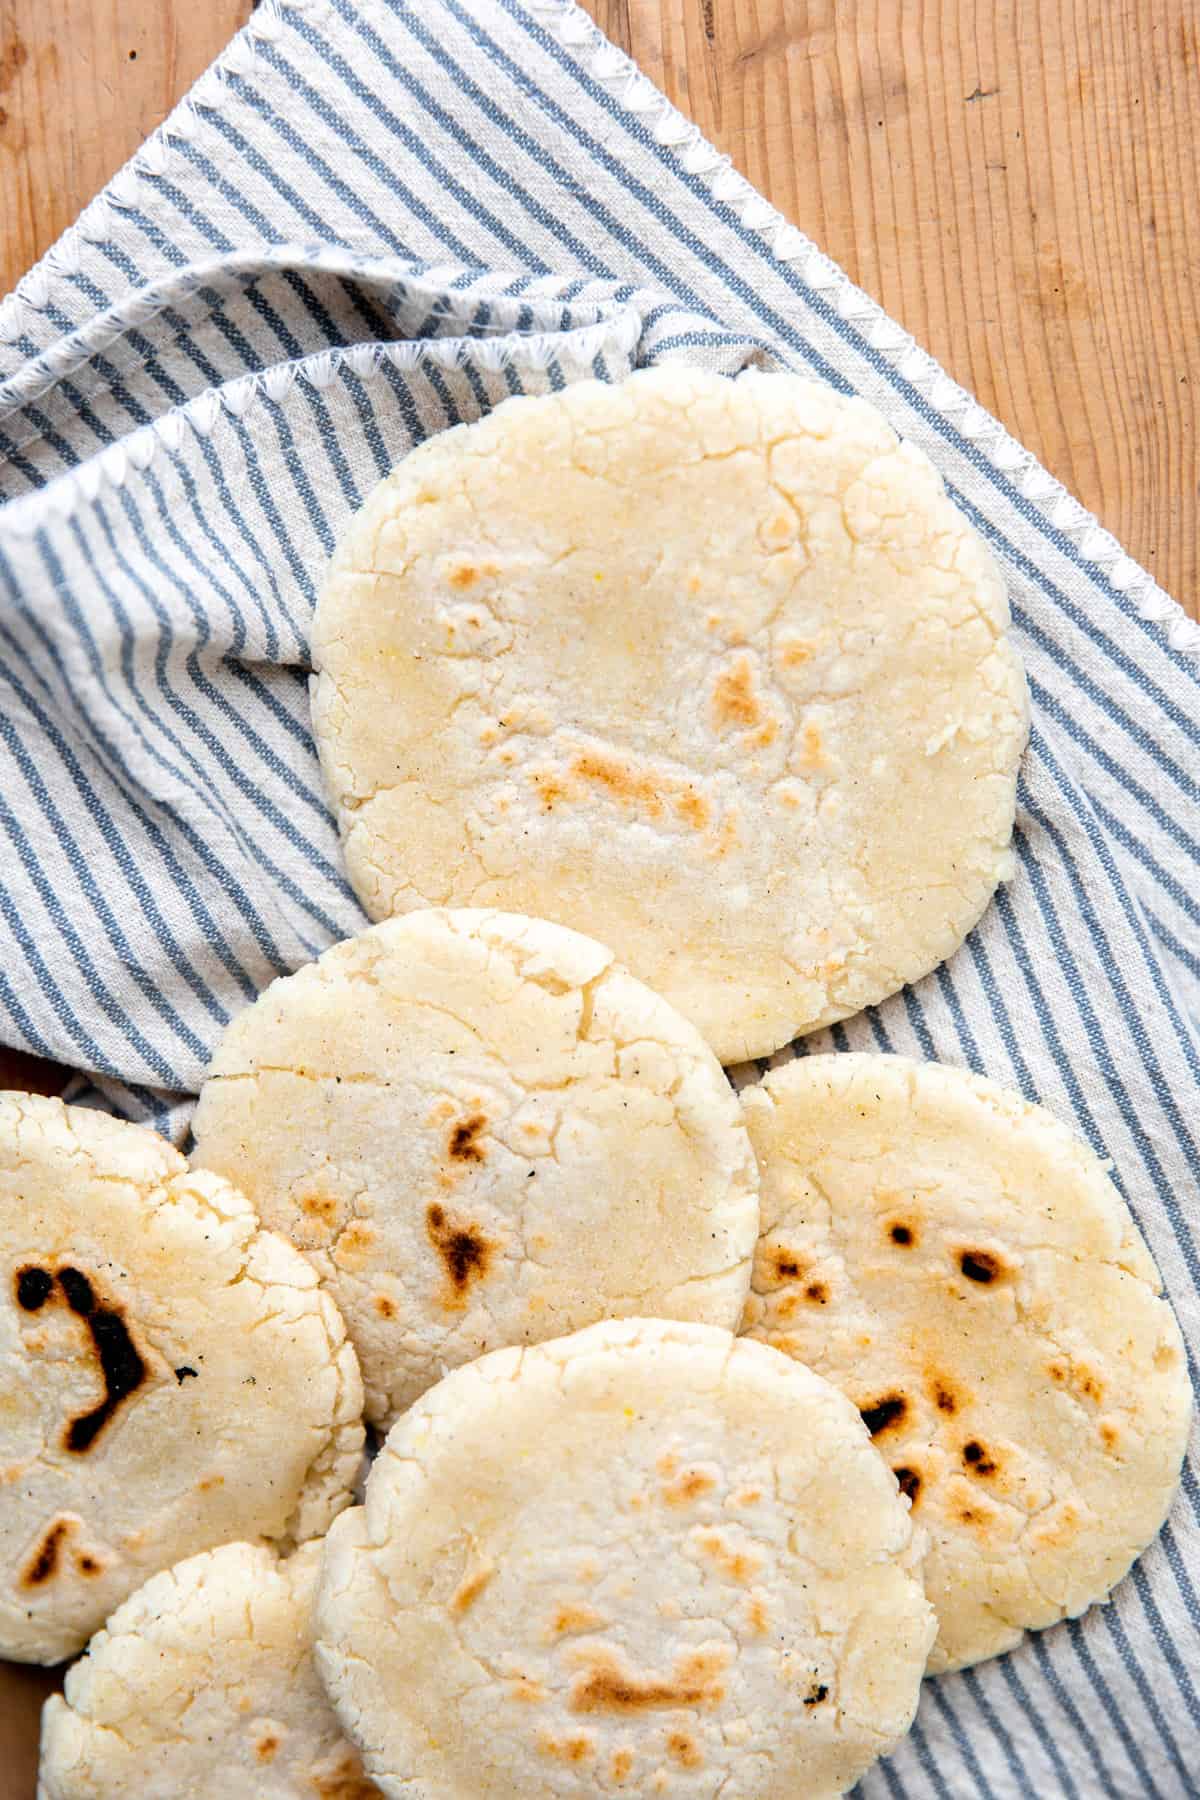 Cooked gorditas before filling is added.